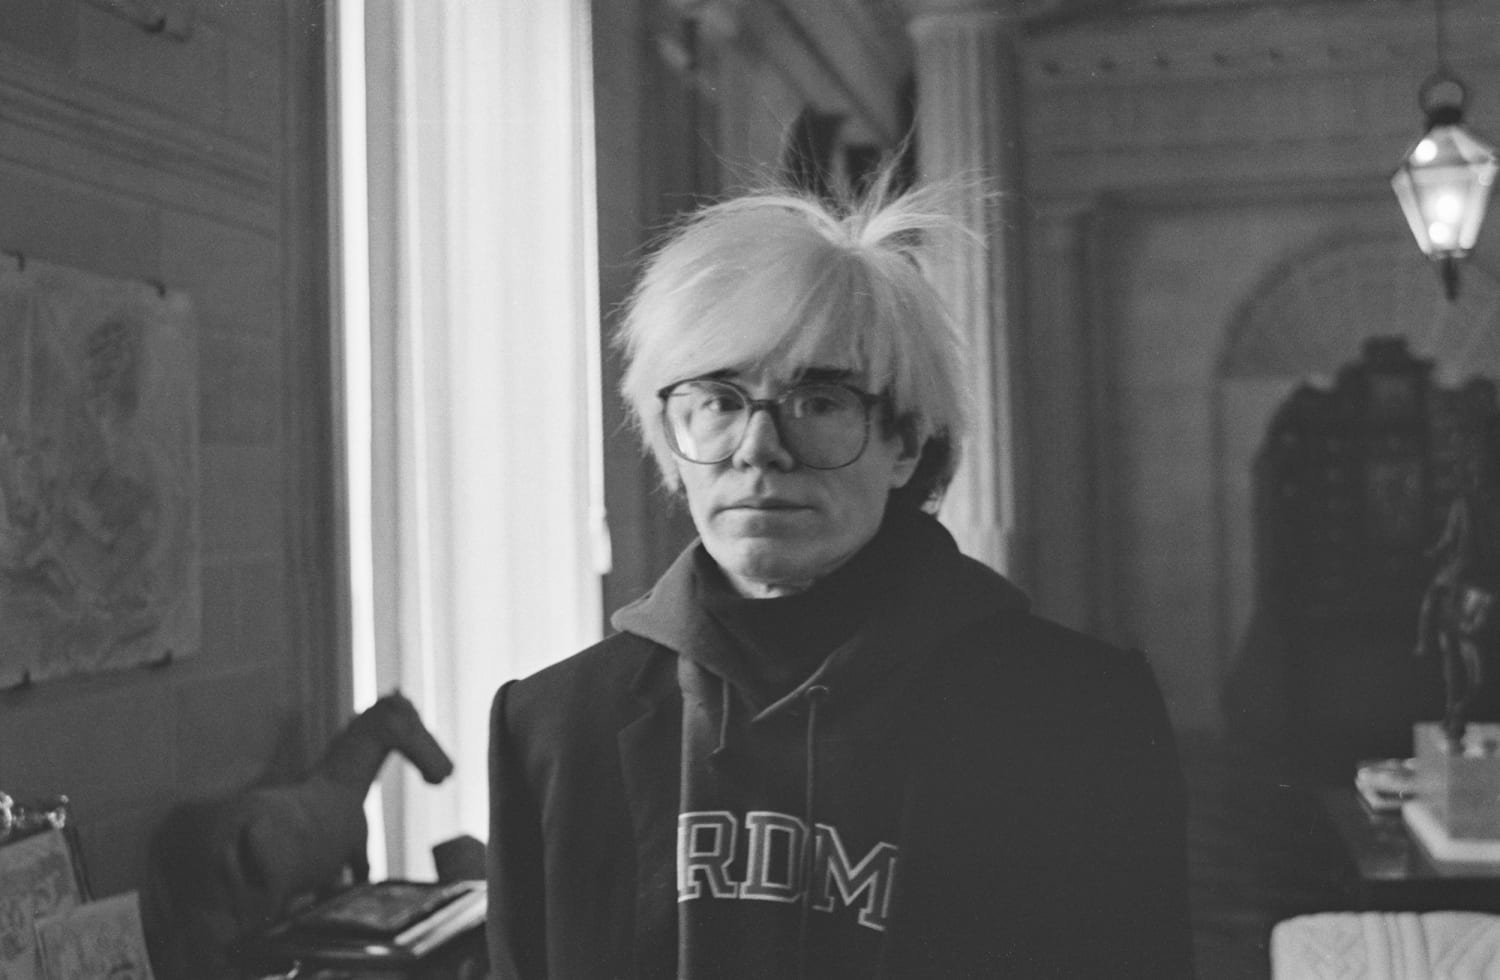 The Andy Warhol Diaries explores how the iconic artist was shaped by his great loves